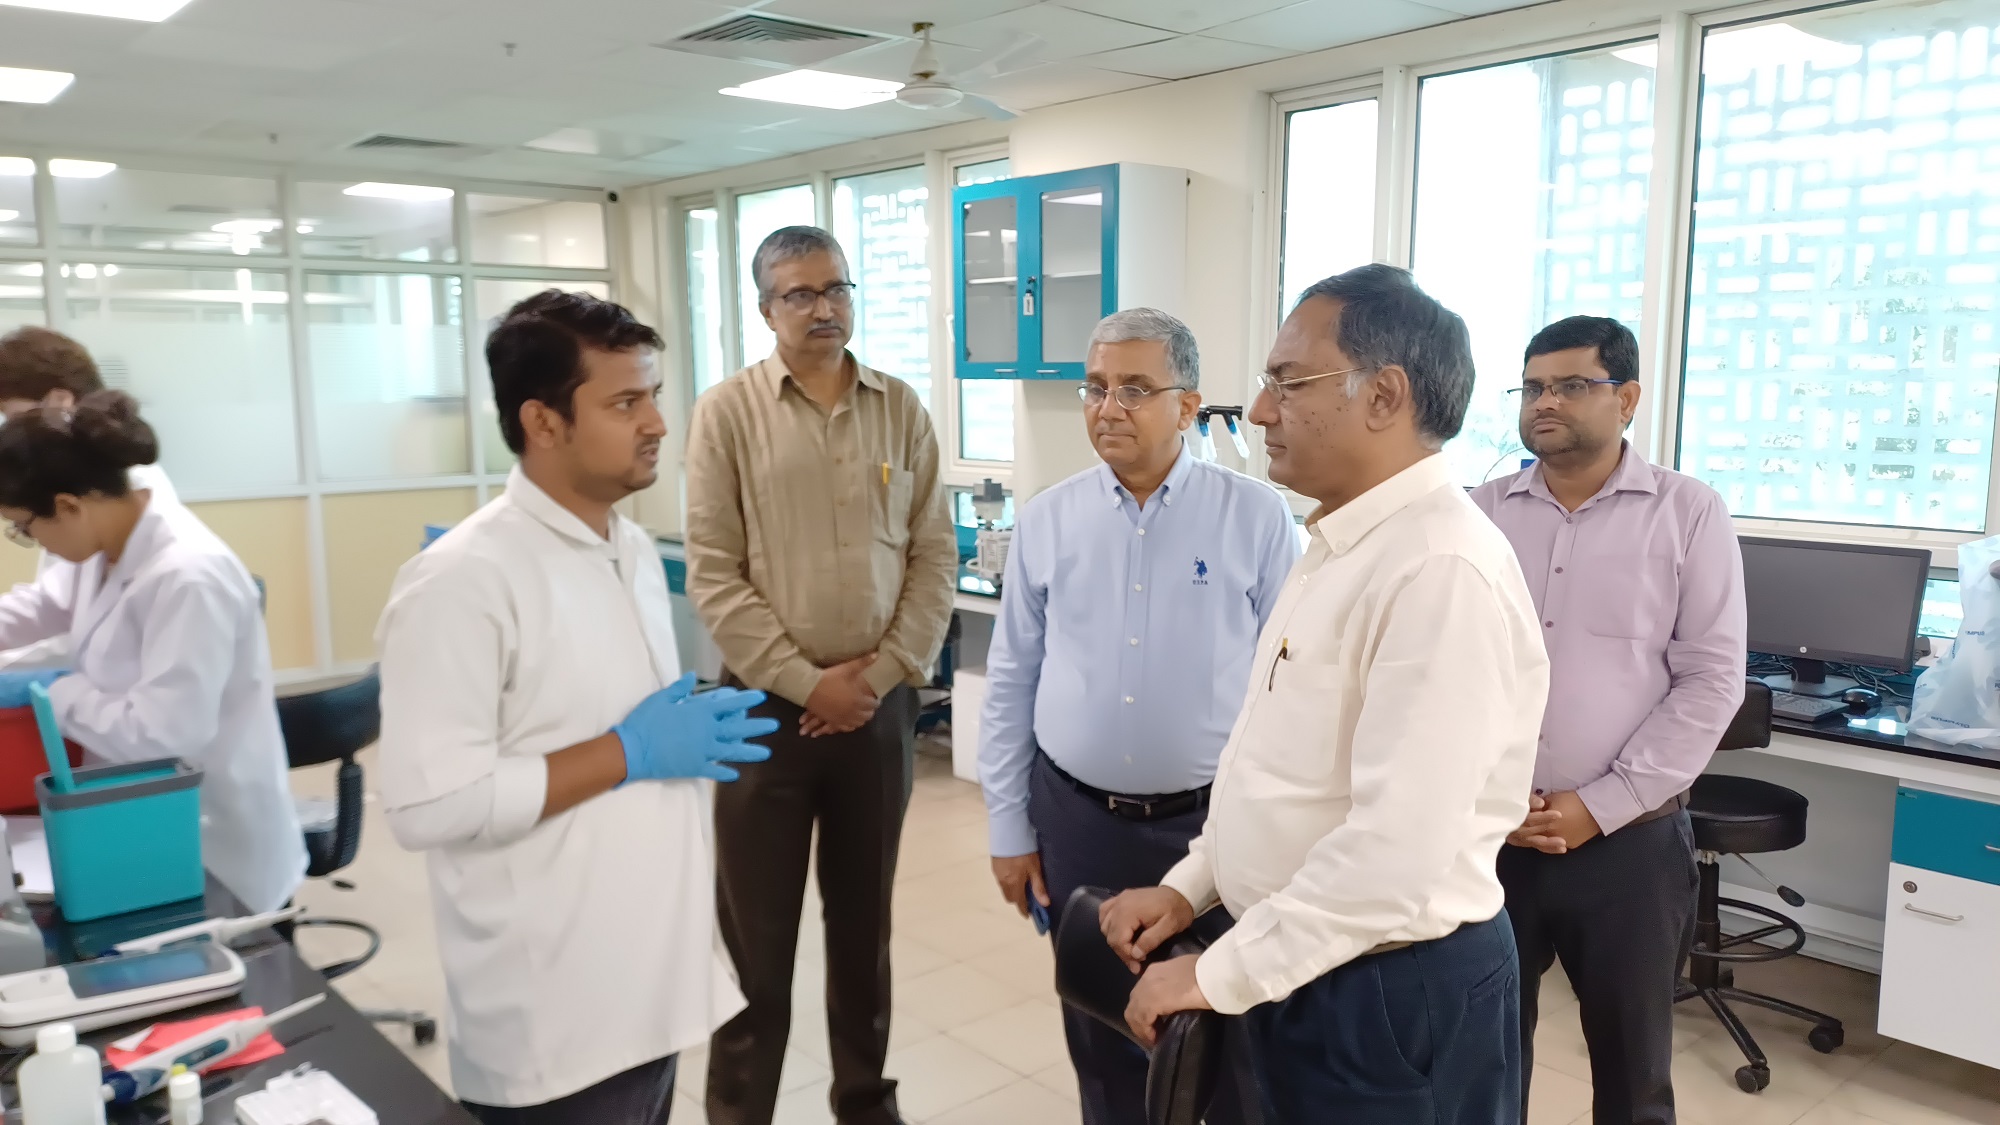 Visit of Prof. Ashutosh Sharma, former Secretary, Department of Science and Technology (DST)